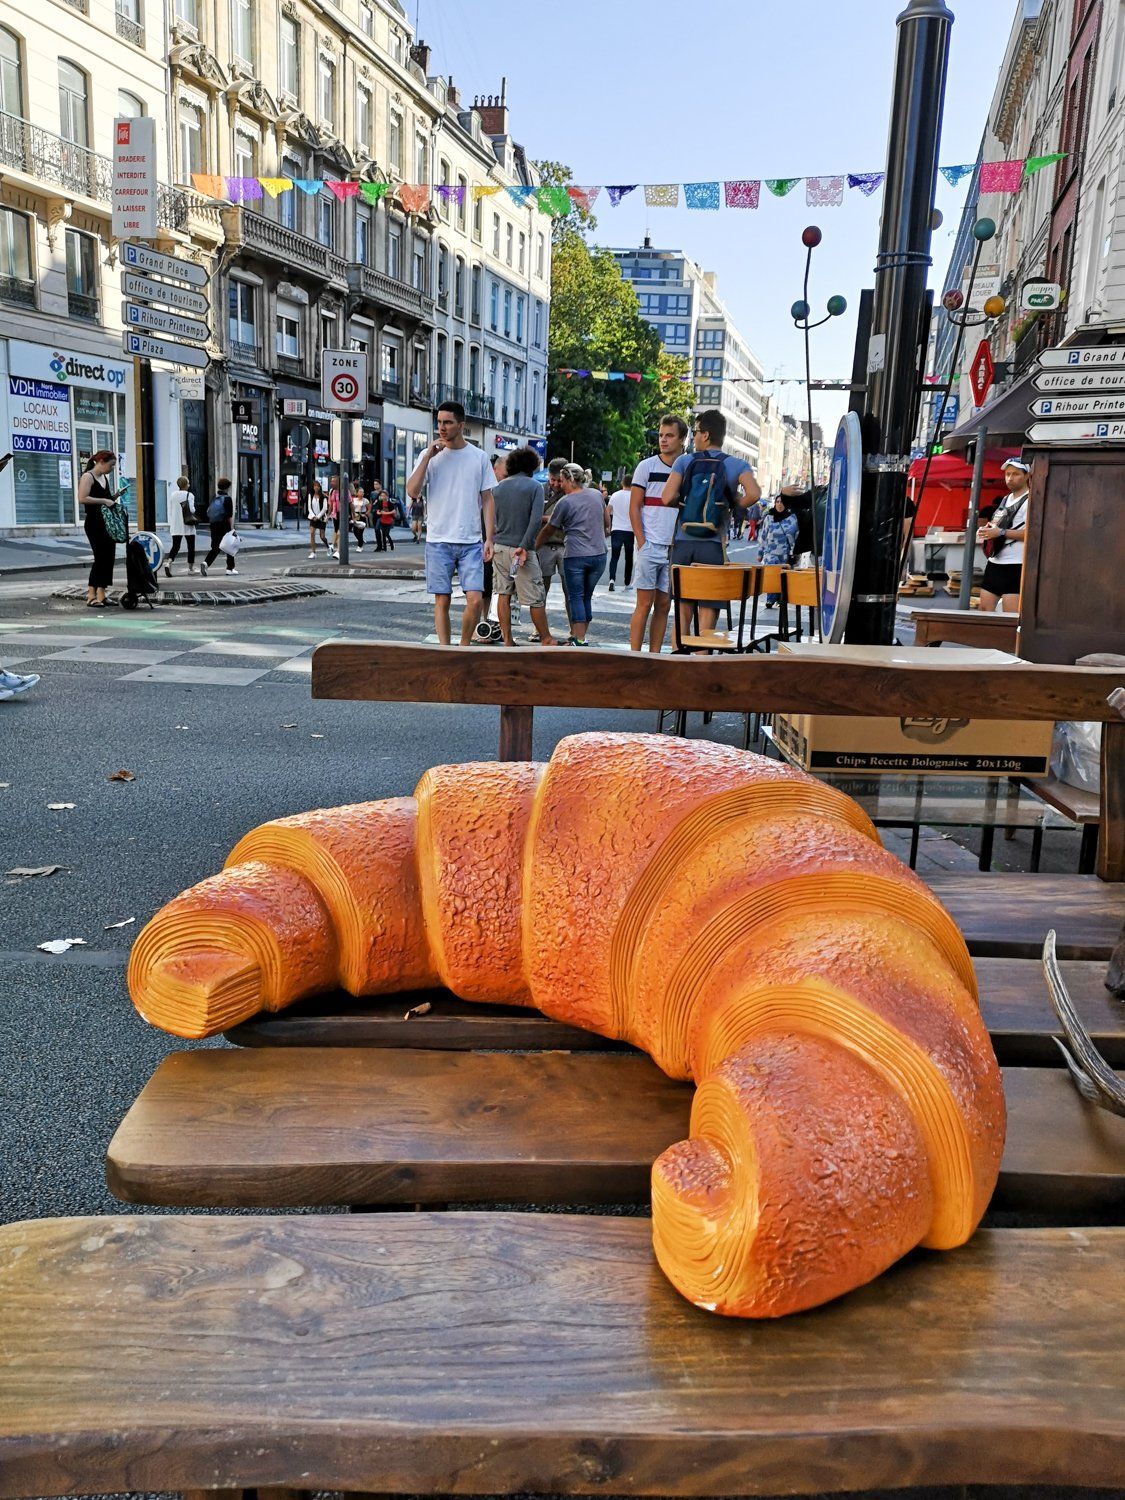 hurry up with my damn croissant